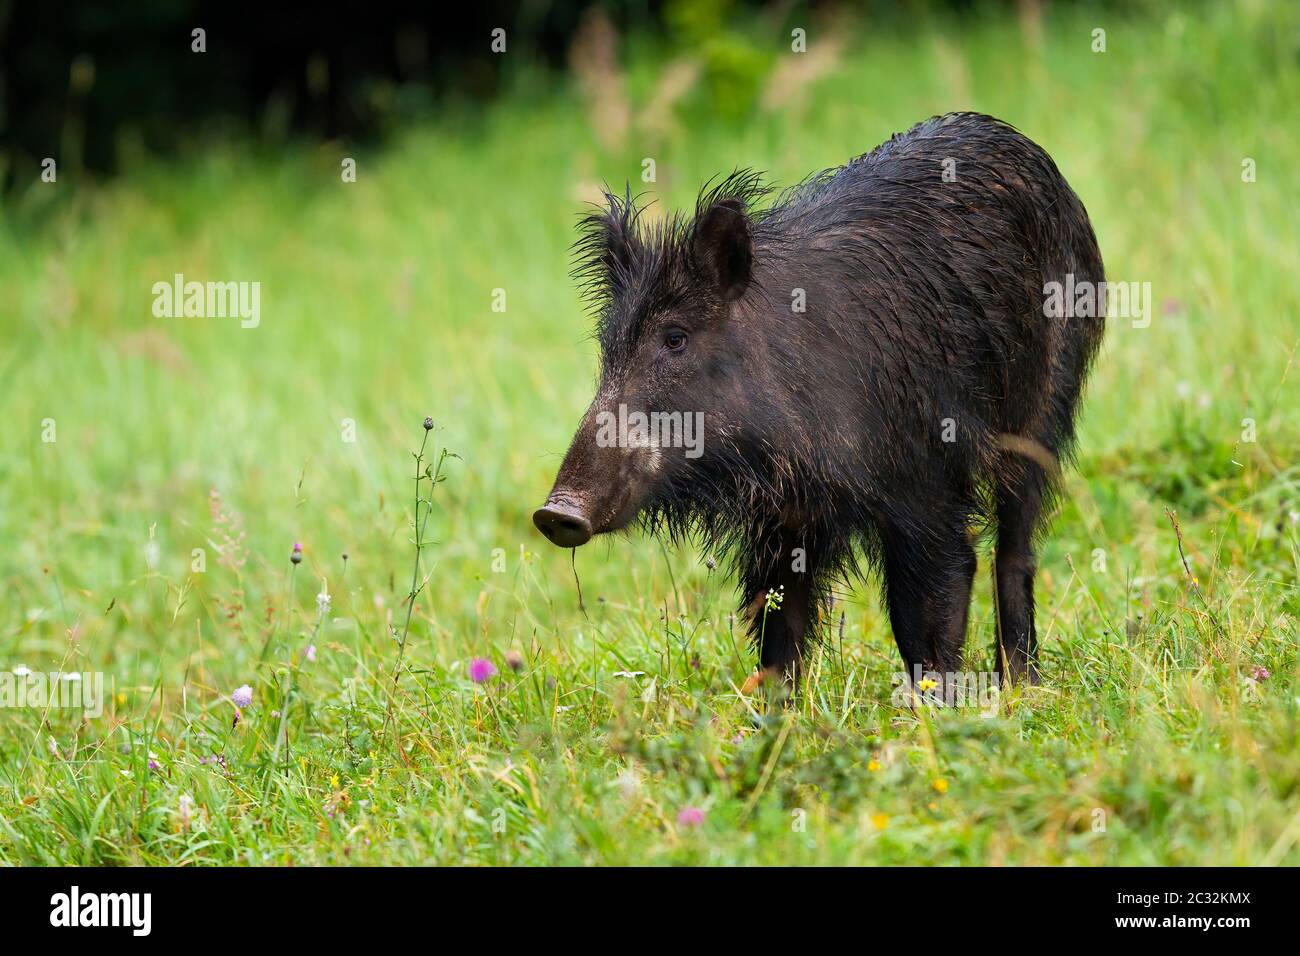 Unaware wild boar, sus scrofa, on hay field in wilderness looking aside with green blurred background. Suspecting mammal standing in grass with copy s Stock Photo